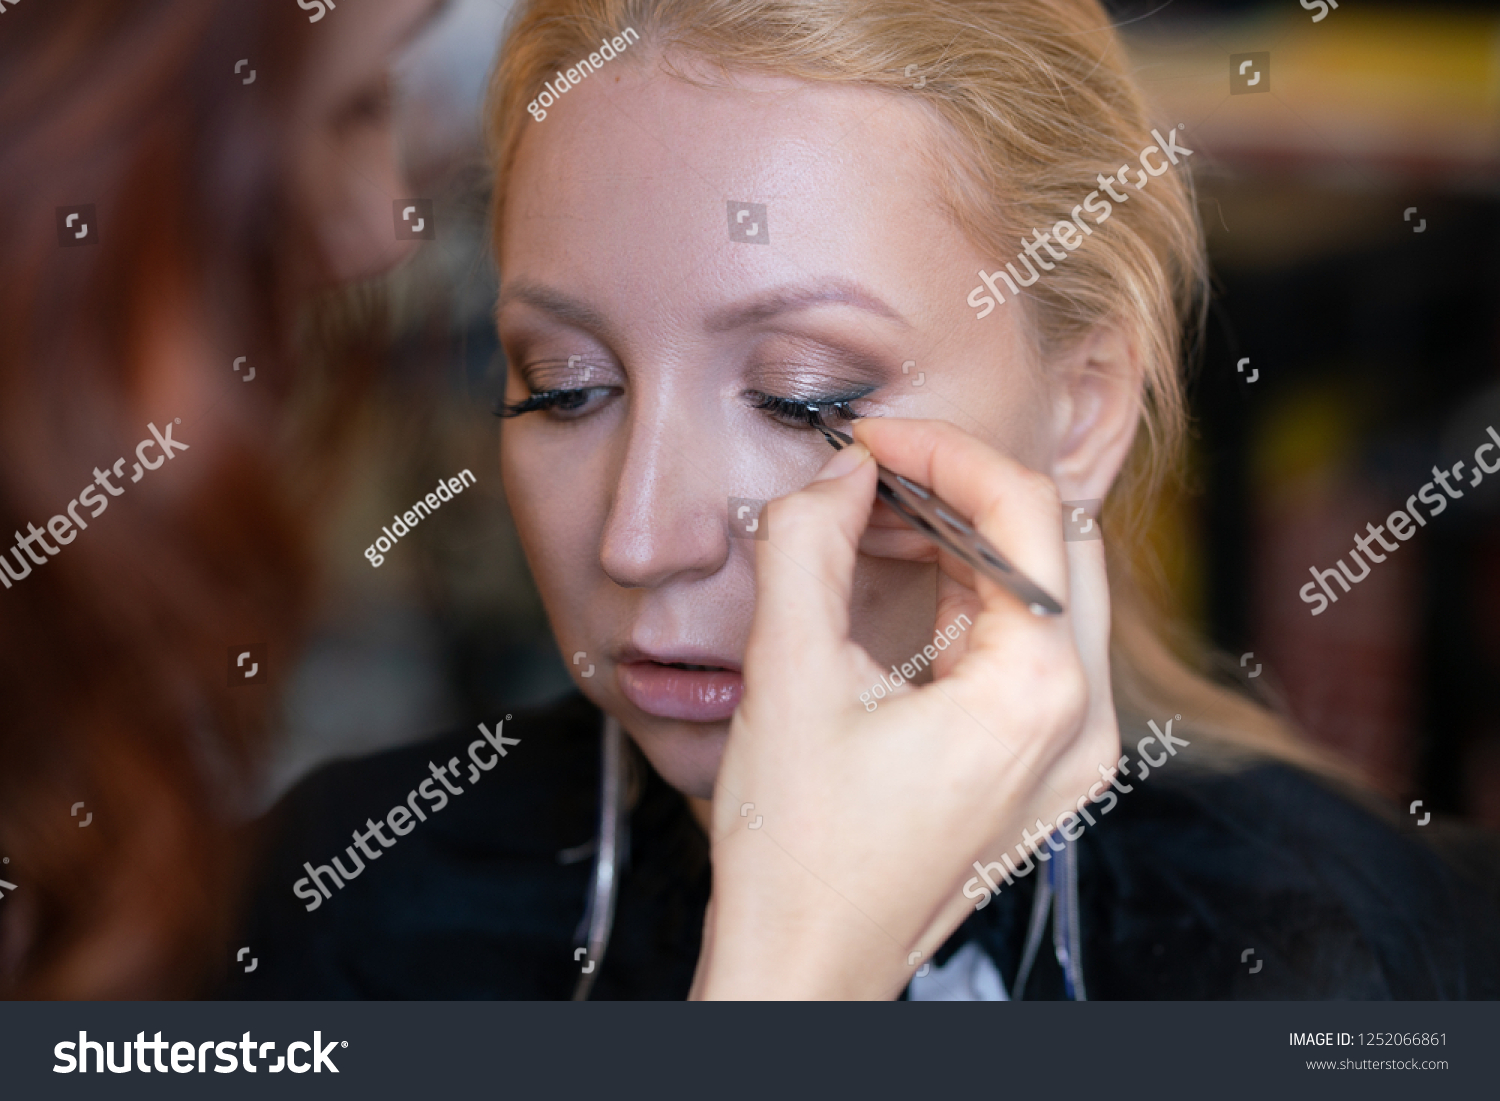 professional makeup artist applies makeup step by step on the face of a woman blonde #1252066861